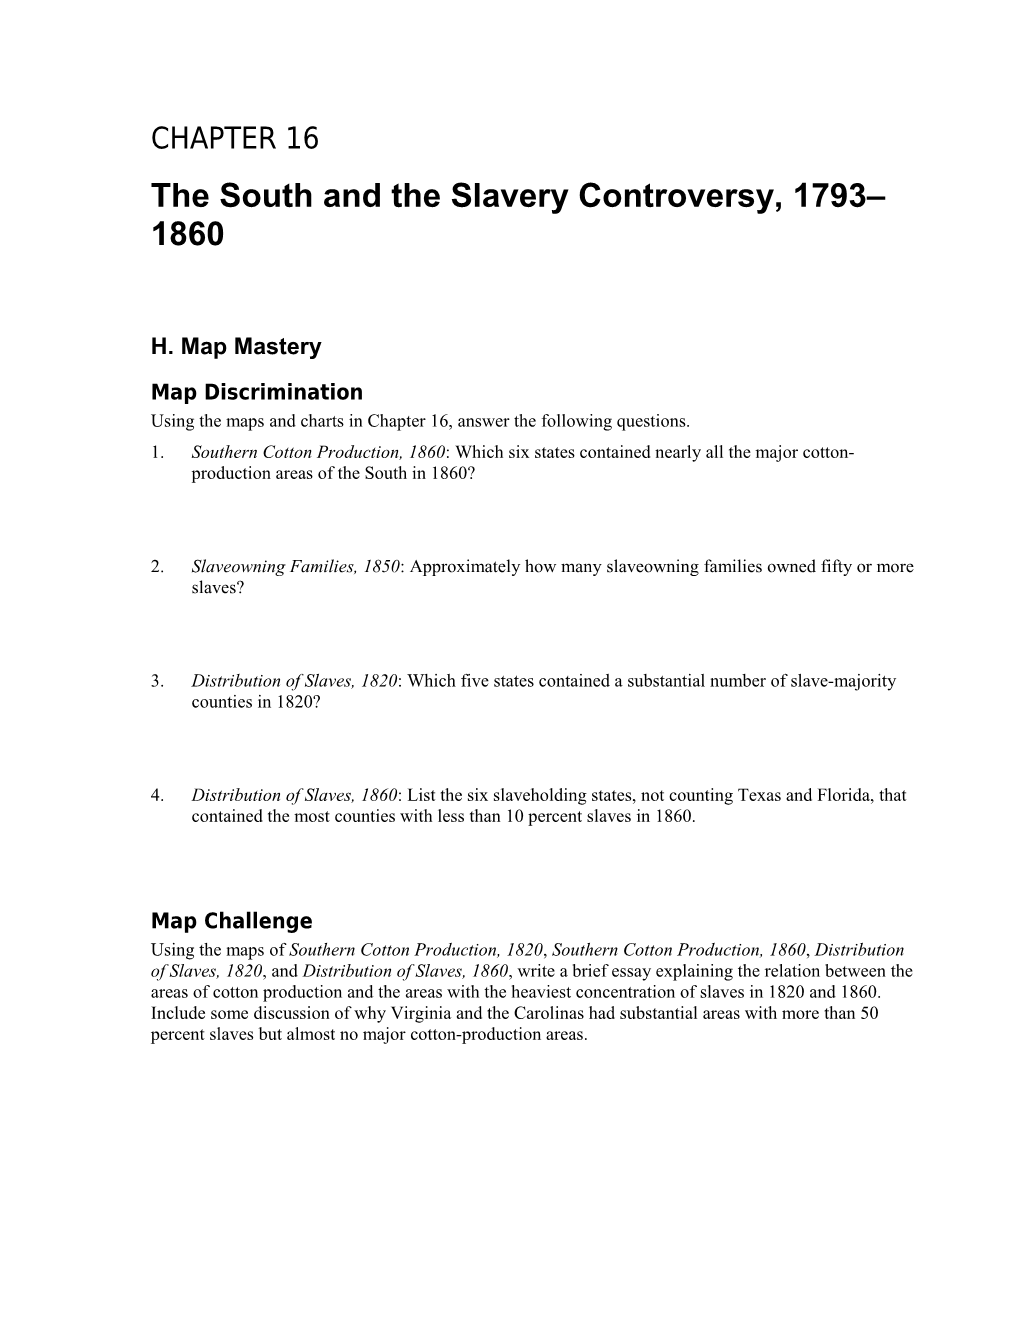 The South and the Slavery Controversy, 1793 1860